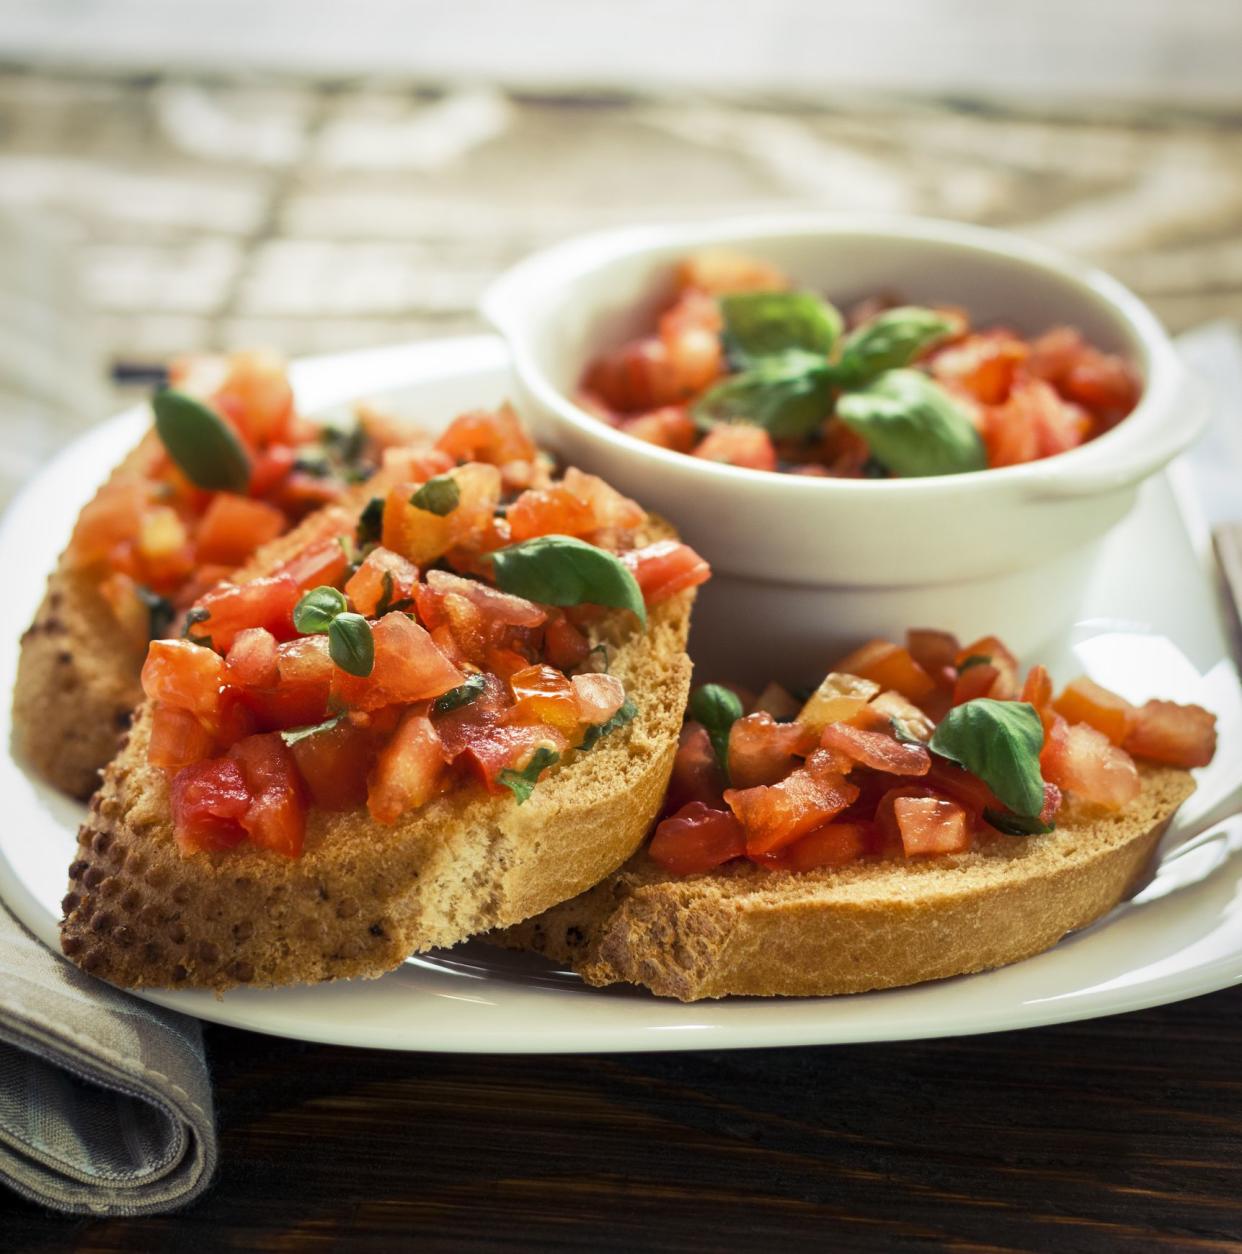 Toast topped with tomato salsa